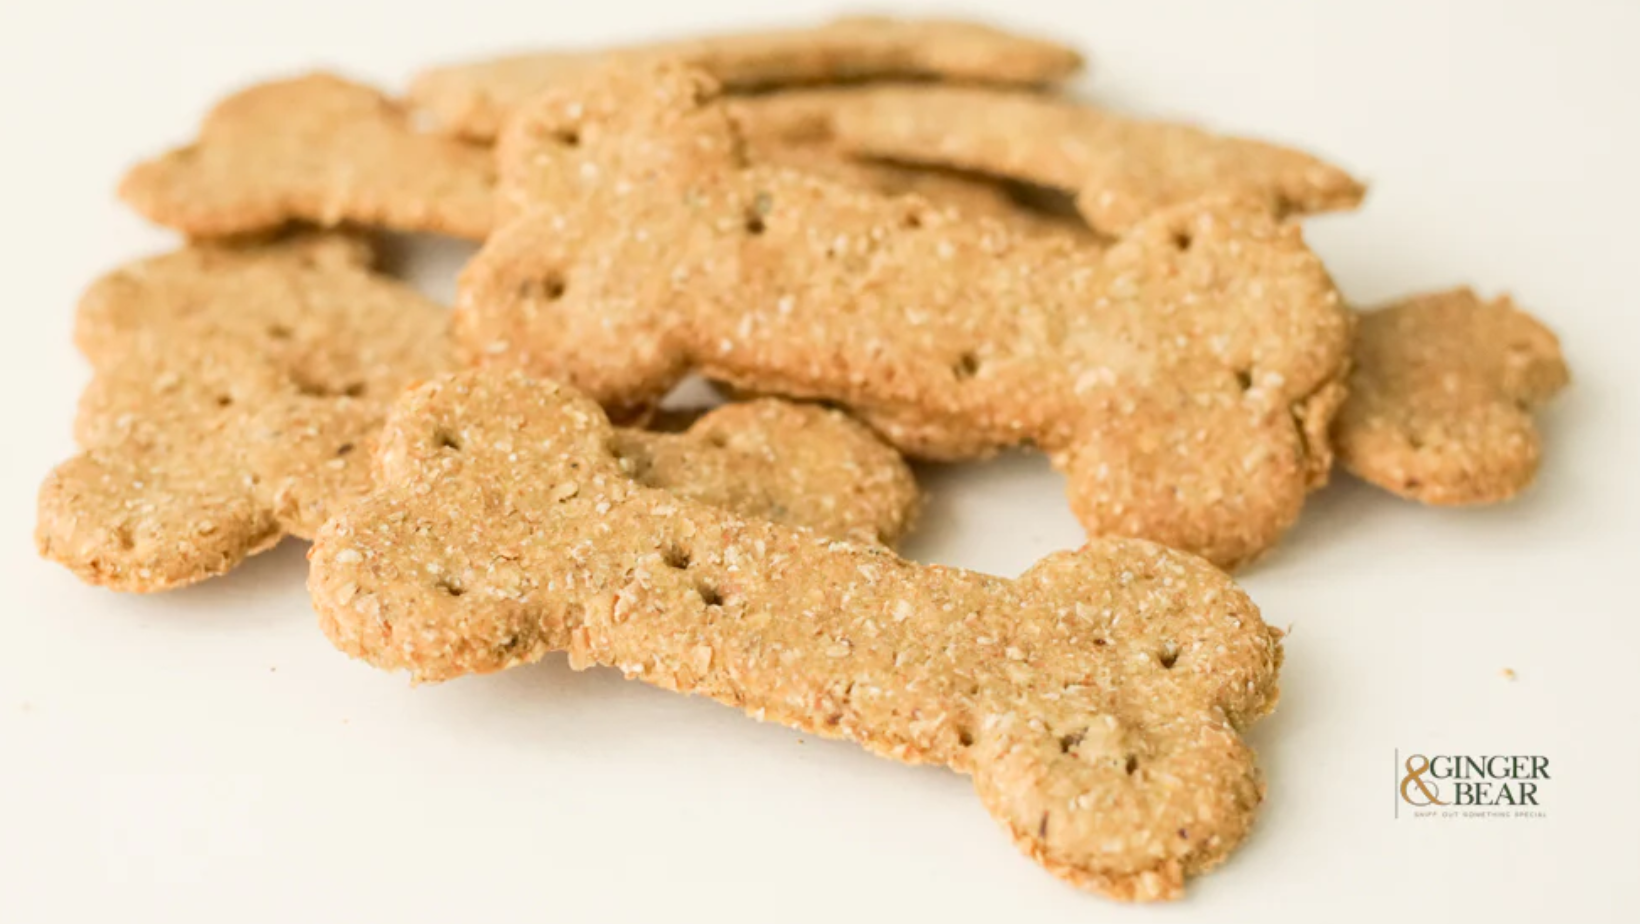 Are Dog Treats Necessary? Here's What You Need to Know